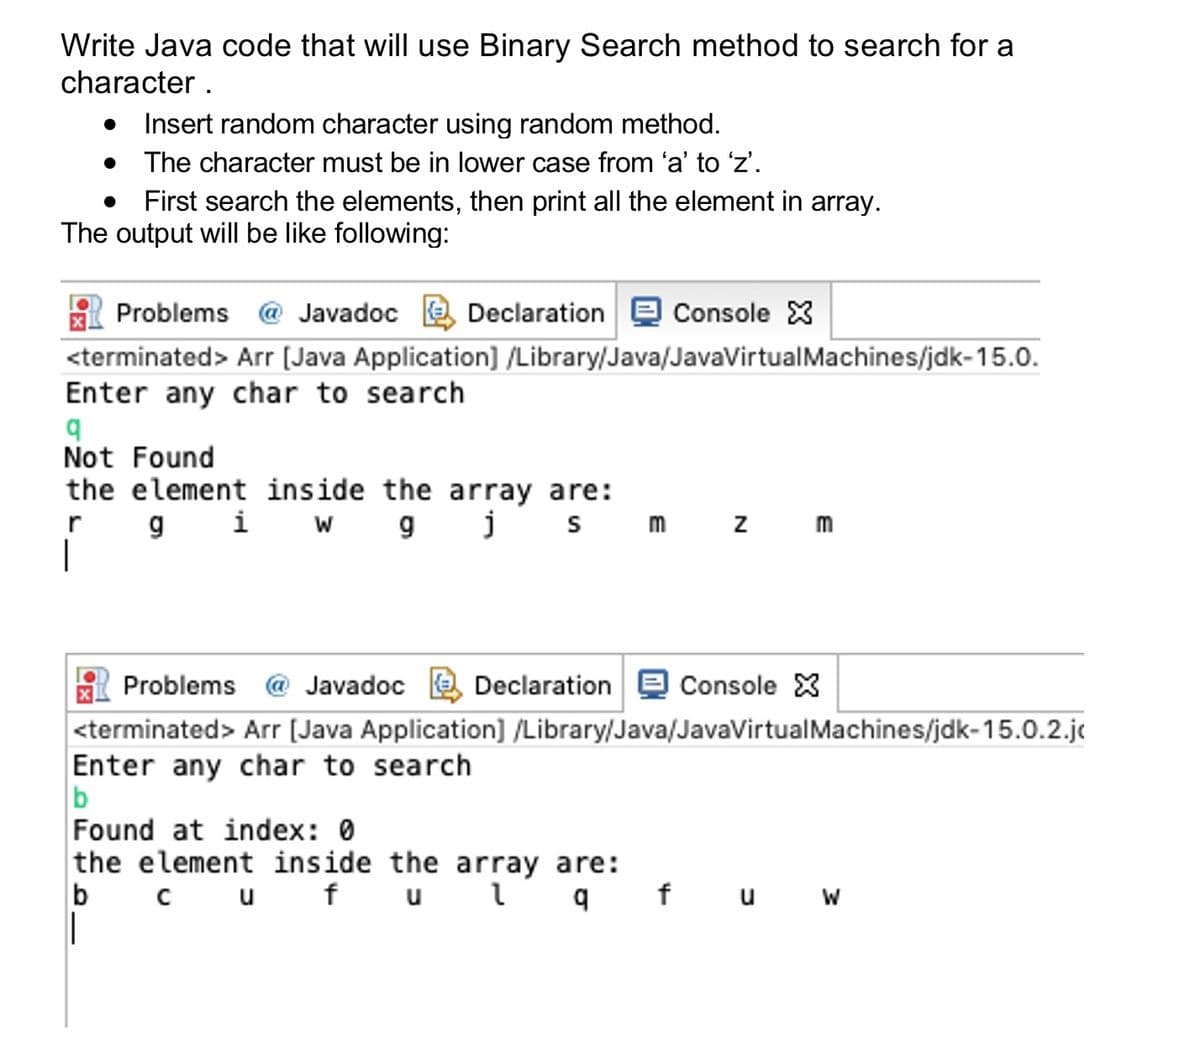 Write Java code that will use Binary Search method to search for a
character .
Insert random character using random method.
The character must be in lower case from 'a' to 'z'.
First search the elements, then print all the element in array.
The output will be like following:
Problems @ Javadoc a Declaration e Console X
<terminated> Arr (Java Application] /Library/Java/JavaVirtualMachines/jdk-15.0.
Enter any char to search
Not Found
the element inside the array are:
r gi W gj s m z
|
m
Problems @ Javadoc a Declaration e Console X
<terminated> Arr (Java Application] /Library/Java/JavaVirtualMachines/jdk-15.0.2.je
Enter any char to search
b
Found at index: 0
the element inside the array are:
b
cuf u l q f u W
